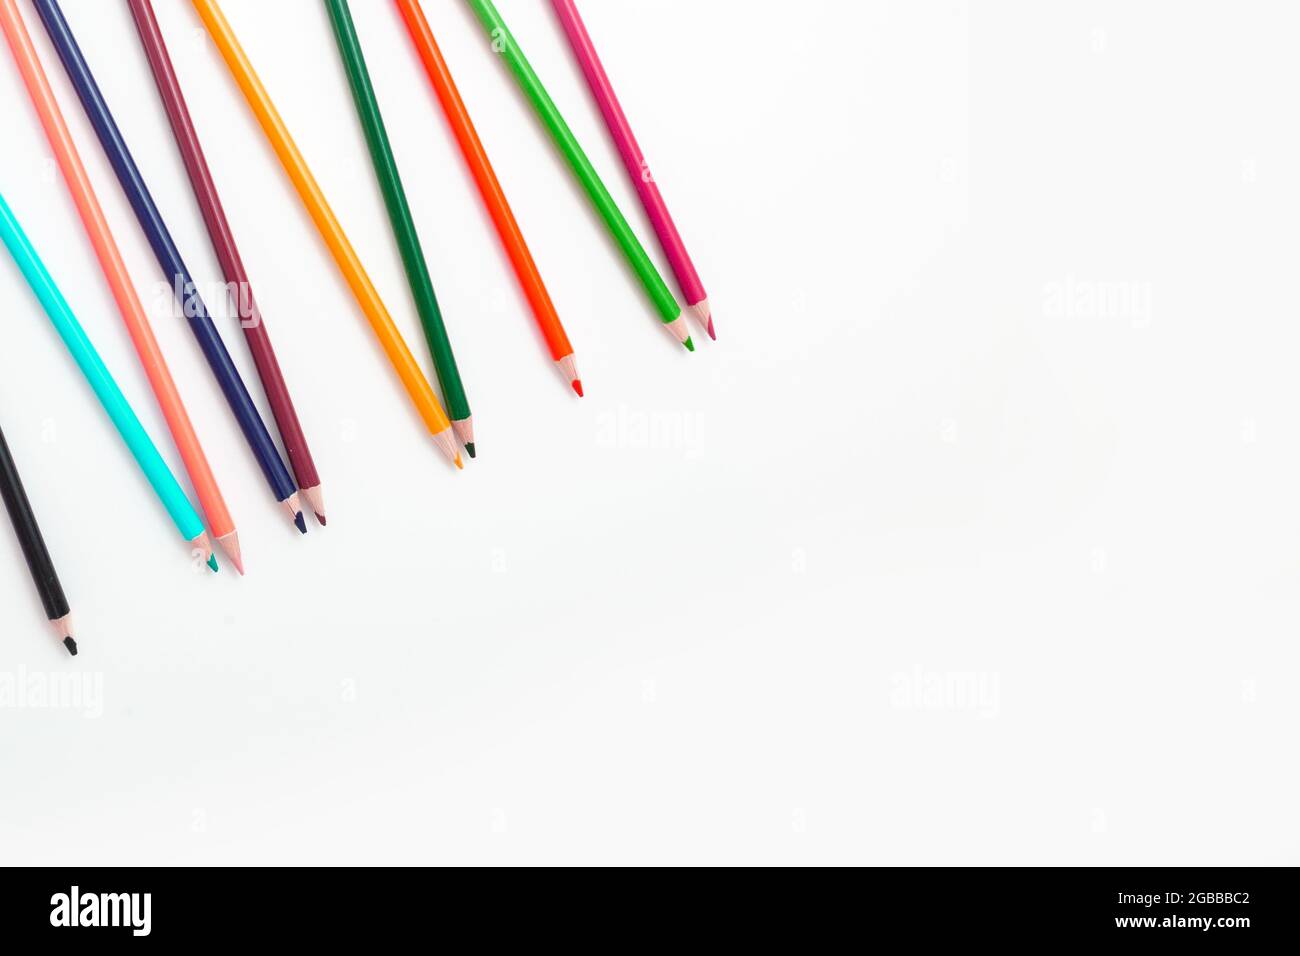 https://c8.alamy.com/comp/2GBBBC2/color-pencils-on-isolated-white-background-2GBBBC2.jpg